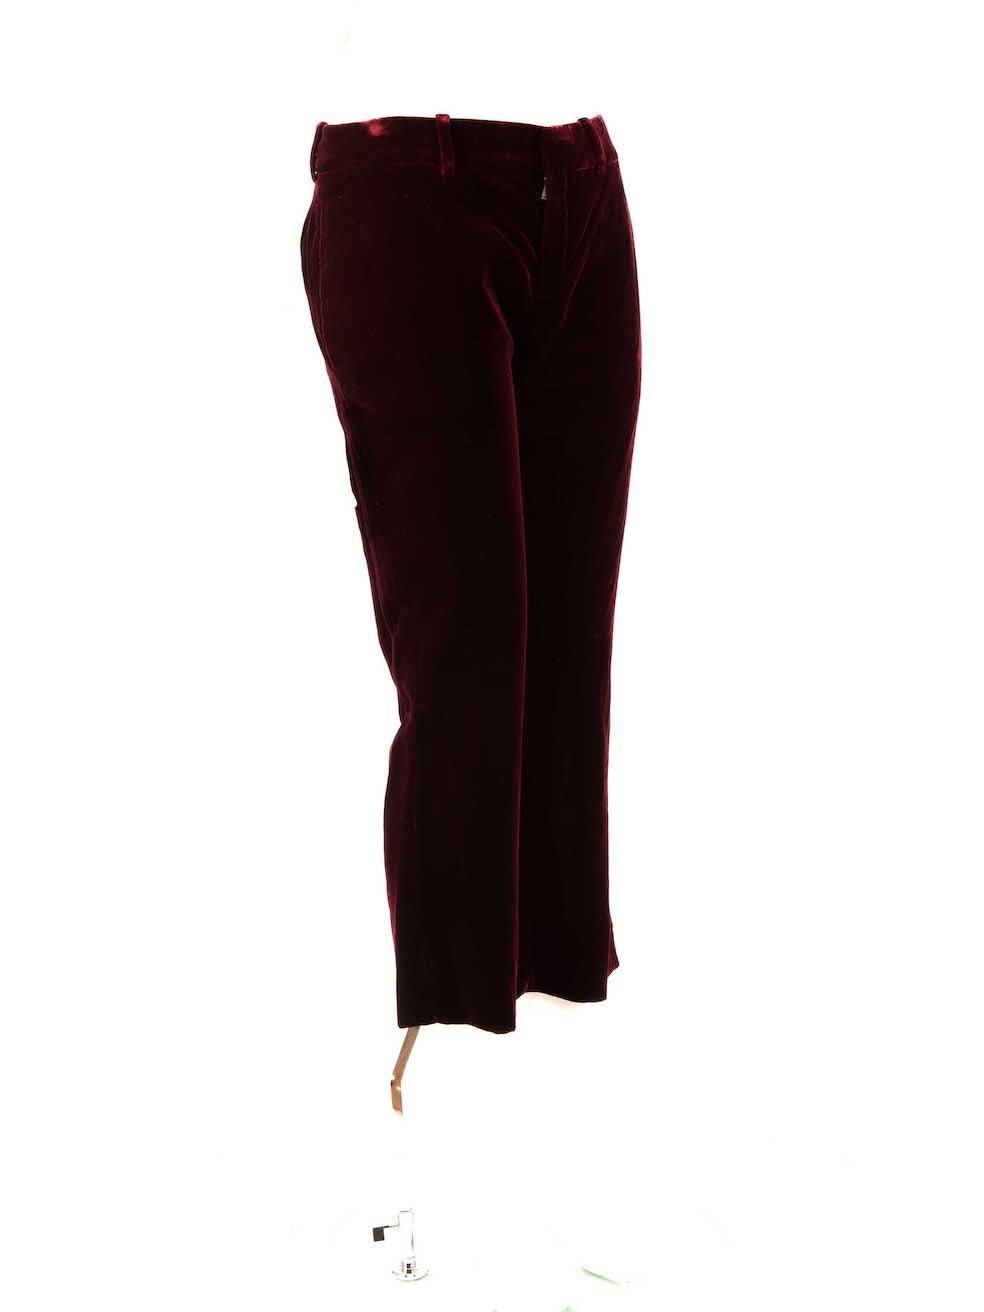 CONDITION is Very good. Hardly any visible wear to trousers is evident on this used Saint Laurent designer resale item.
 
 
 
 Details
 
 
 Red
 
 Velvet
 
 Trousers
 
 Slim fit
 
 Mid rise
 
 2x Side pockets
 
 2x Back pockets
 
 Fly zip, hook and